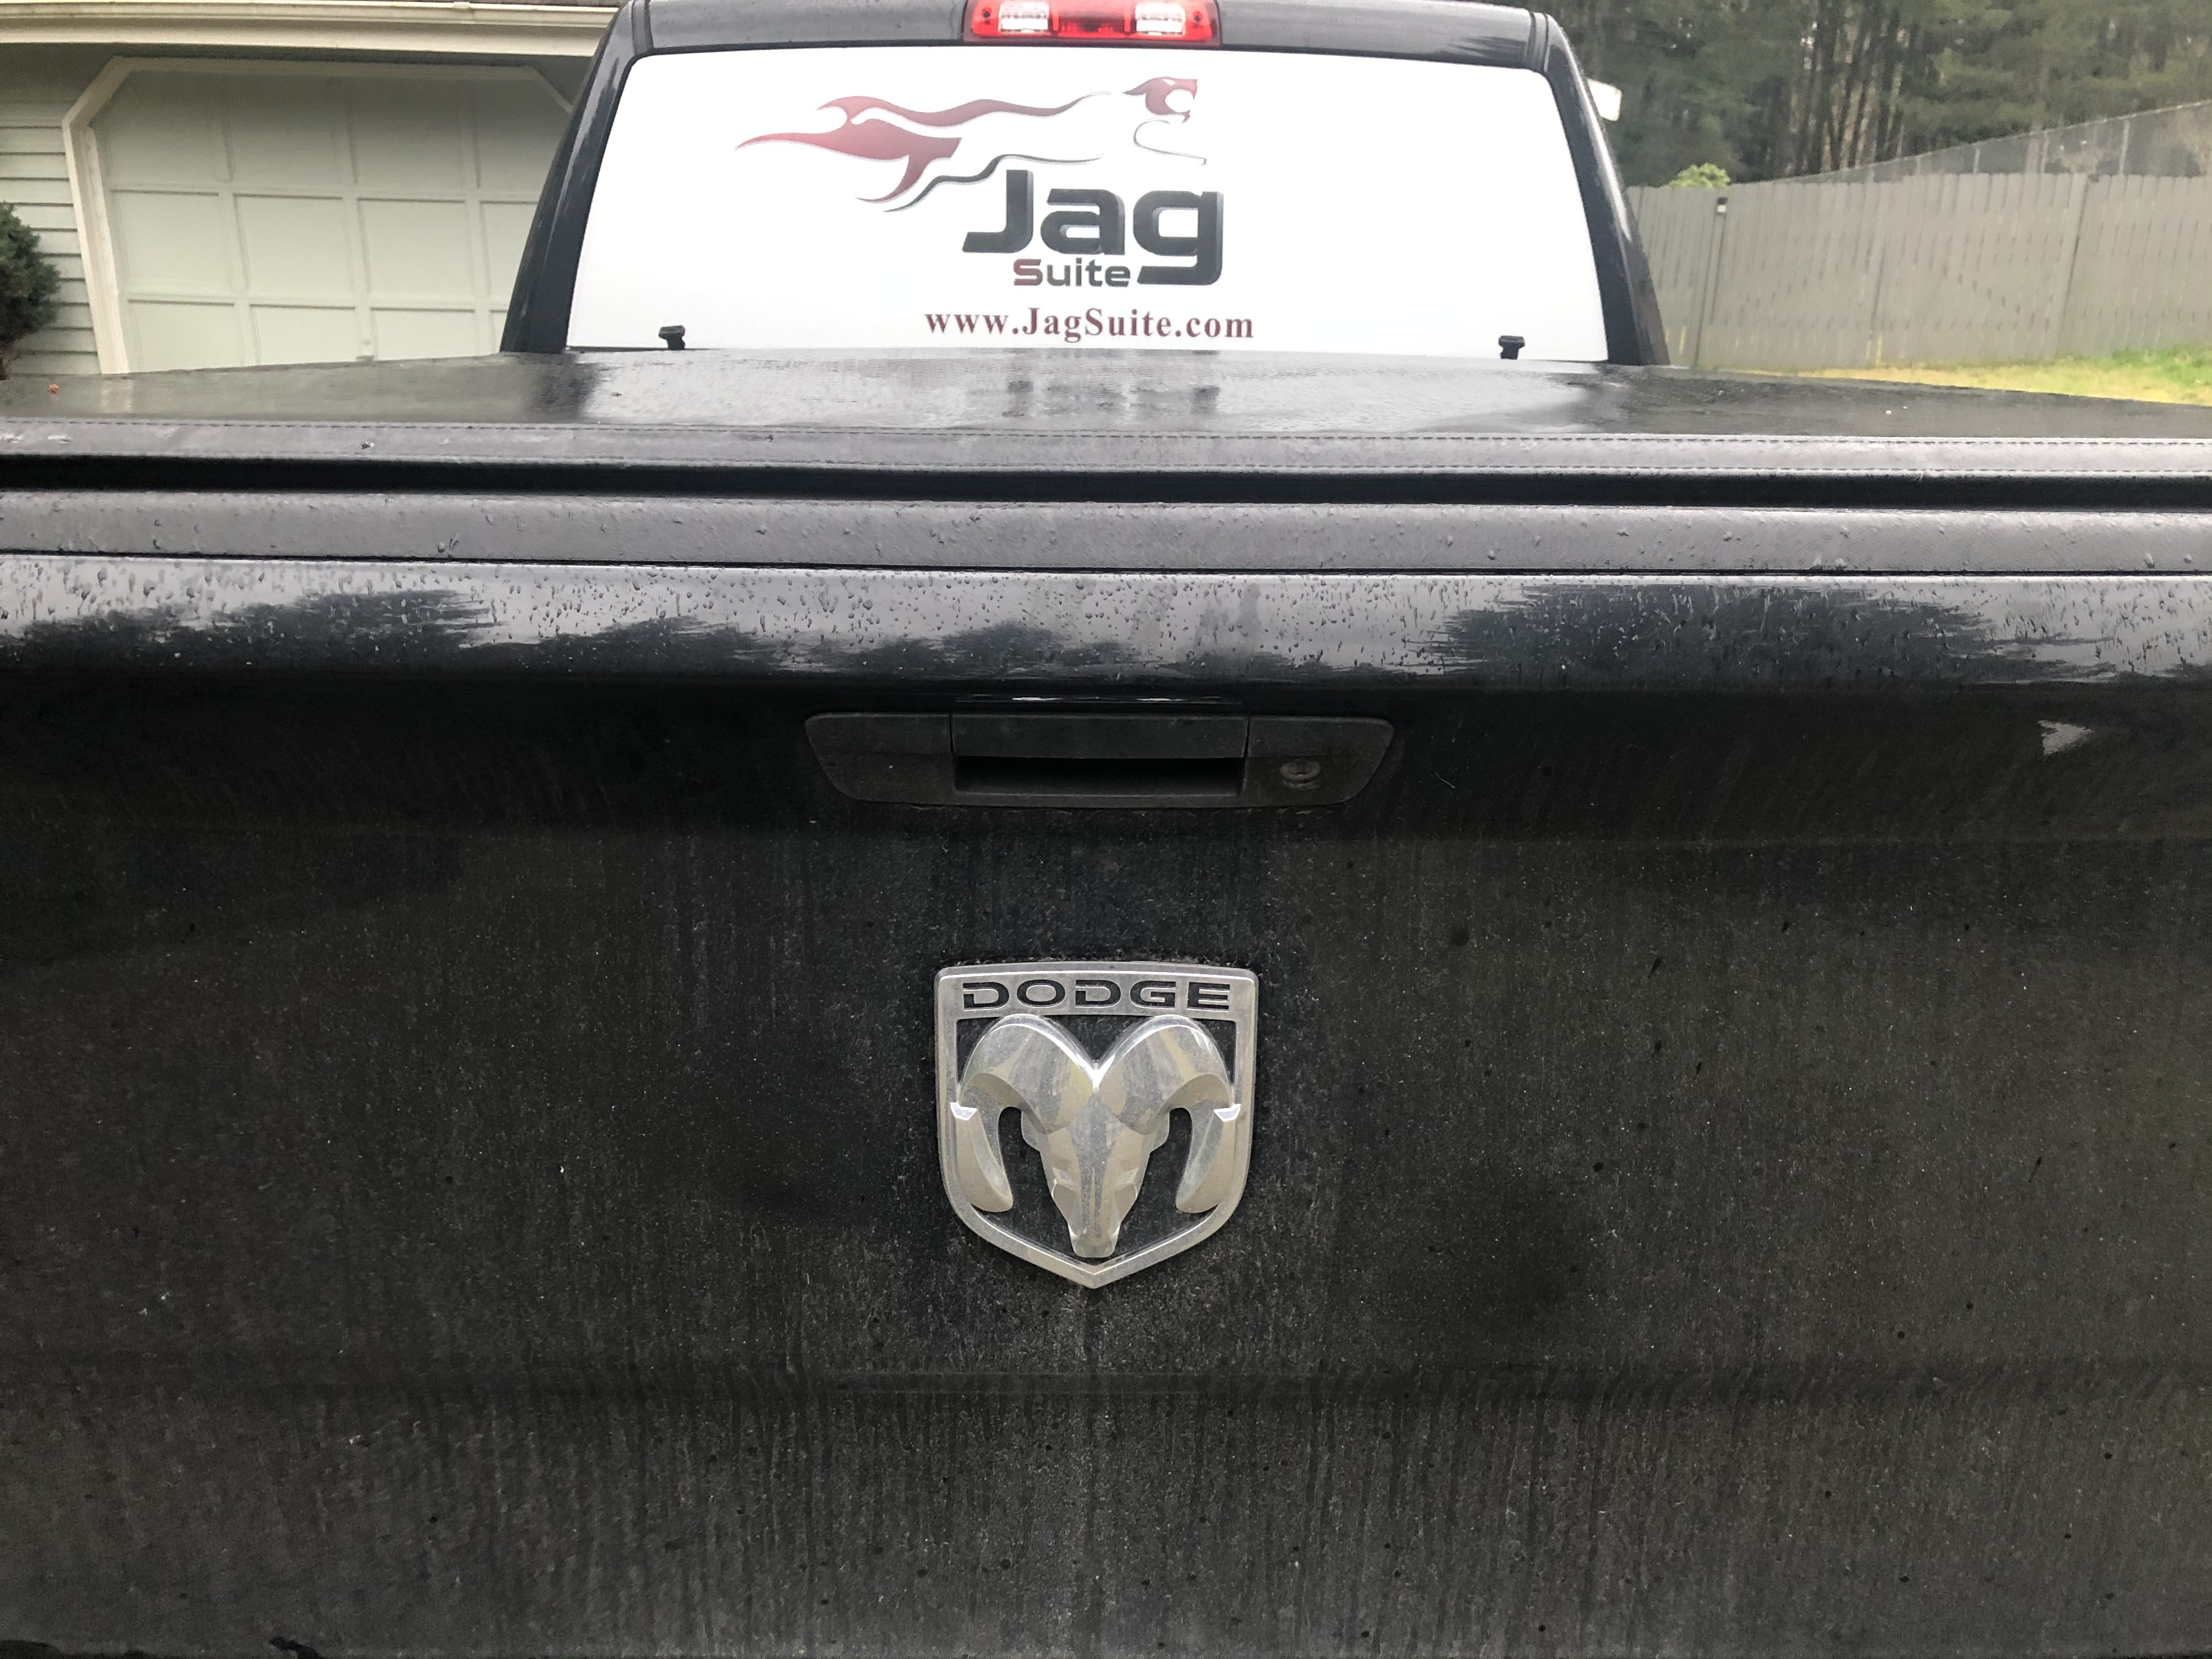 Jag Agriculture